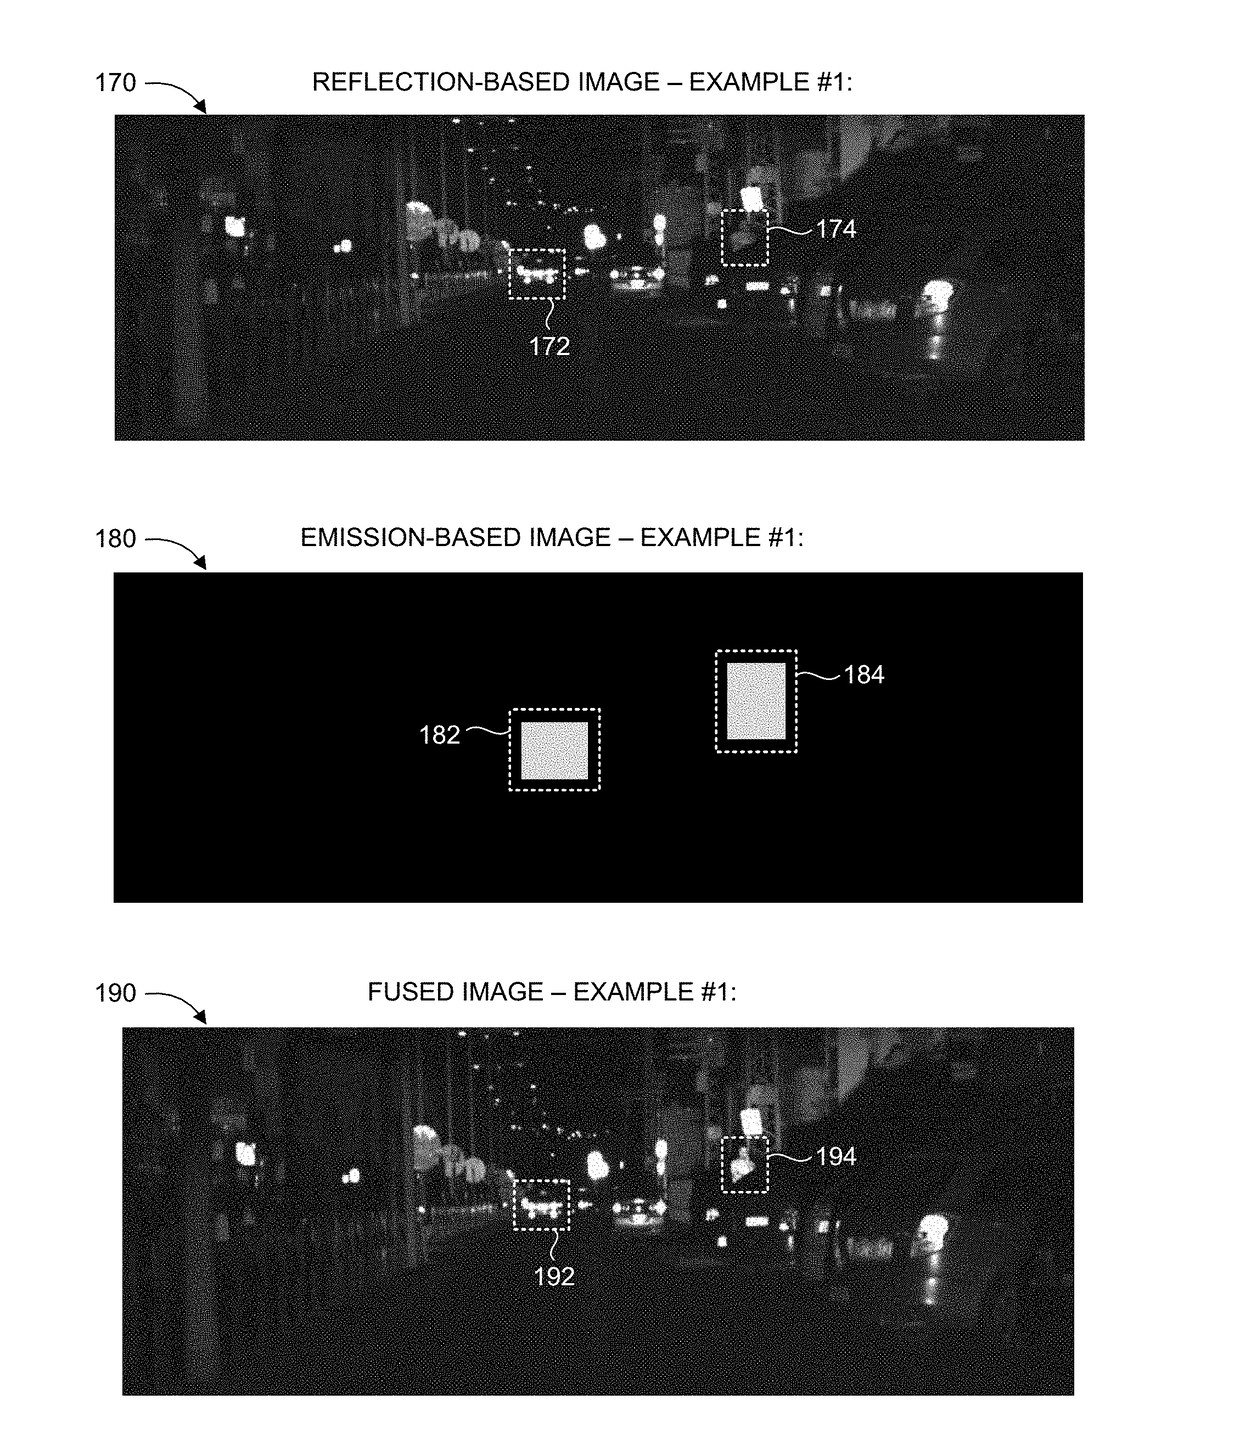 Object Detection Enhancement of Reflection-Based Imaging Unit